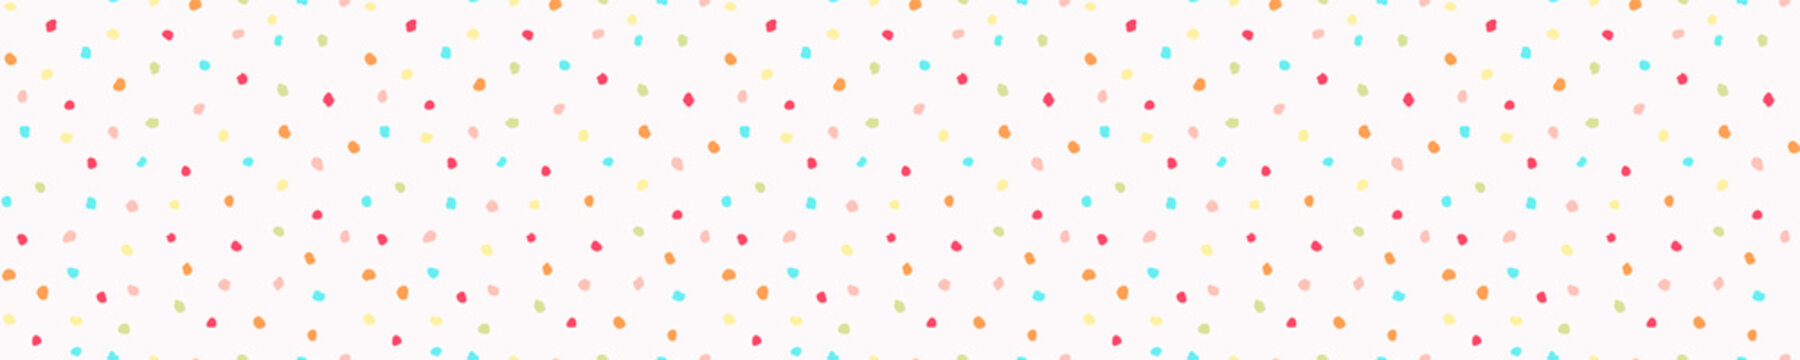 Rainbow Sprinkles Confetti Dotty Border Texture. Fun Seamless Background. Pastel Color Starry Quirky Ribbon Trim Banner. Modern Cute Falling Speckle Pattern. Japanese Kawaii Digital Party Washi Tape